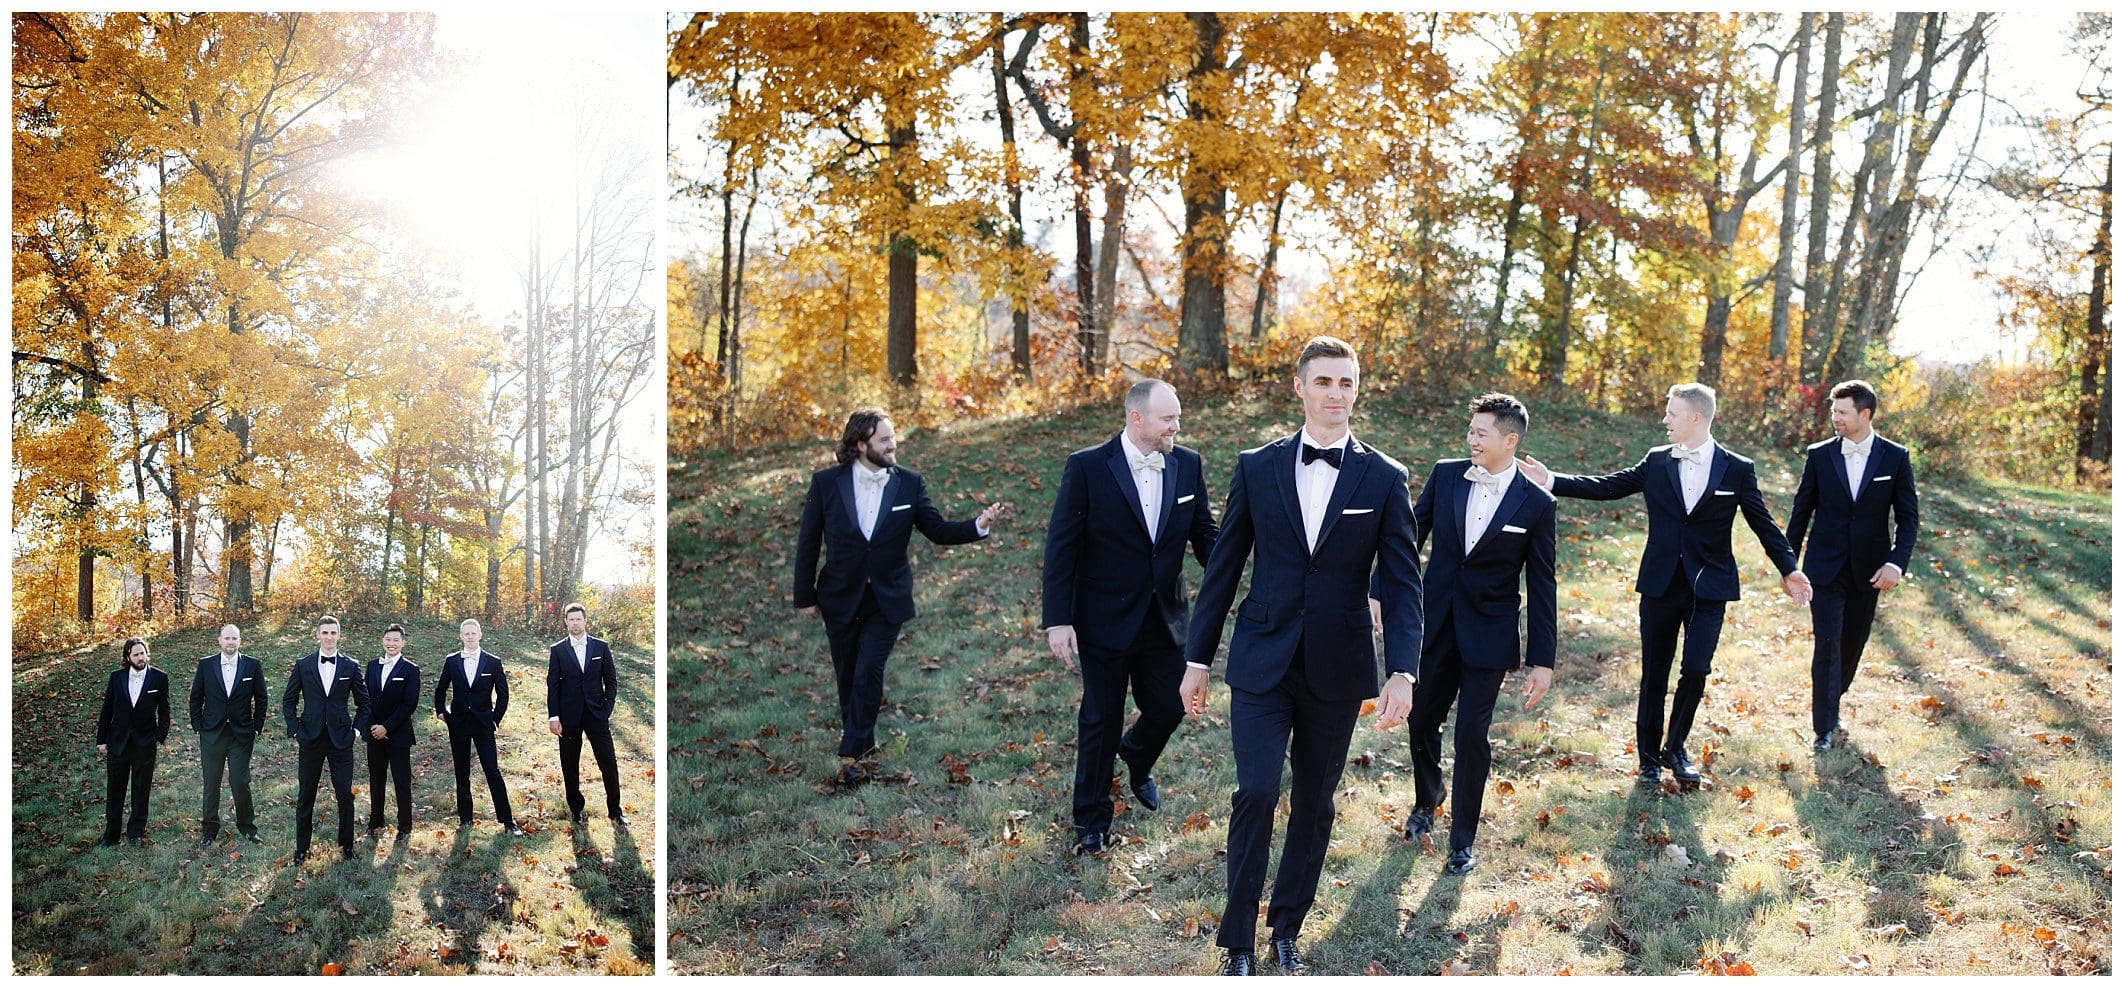 Groomsmen in tuxedos walking through the woods at a fall wedding at crest center.